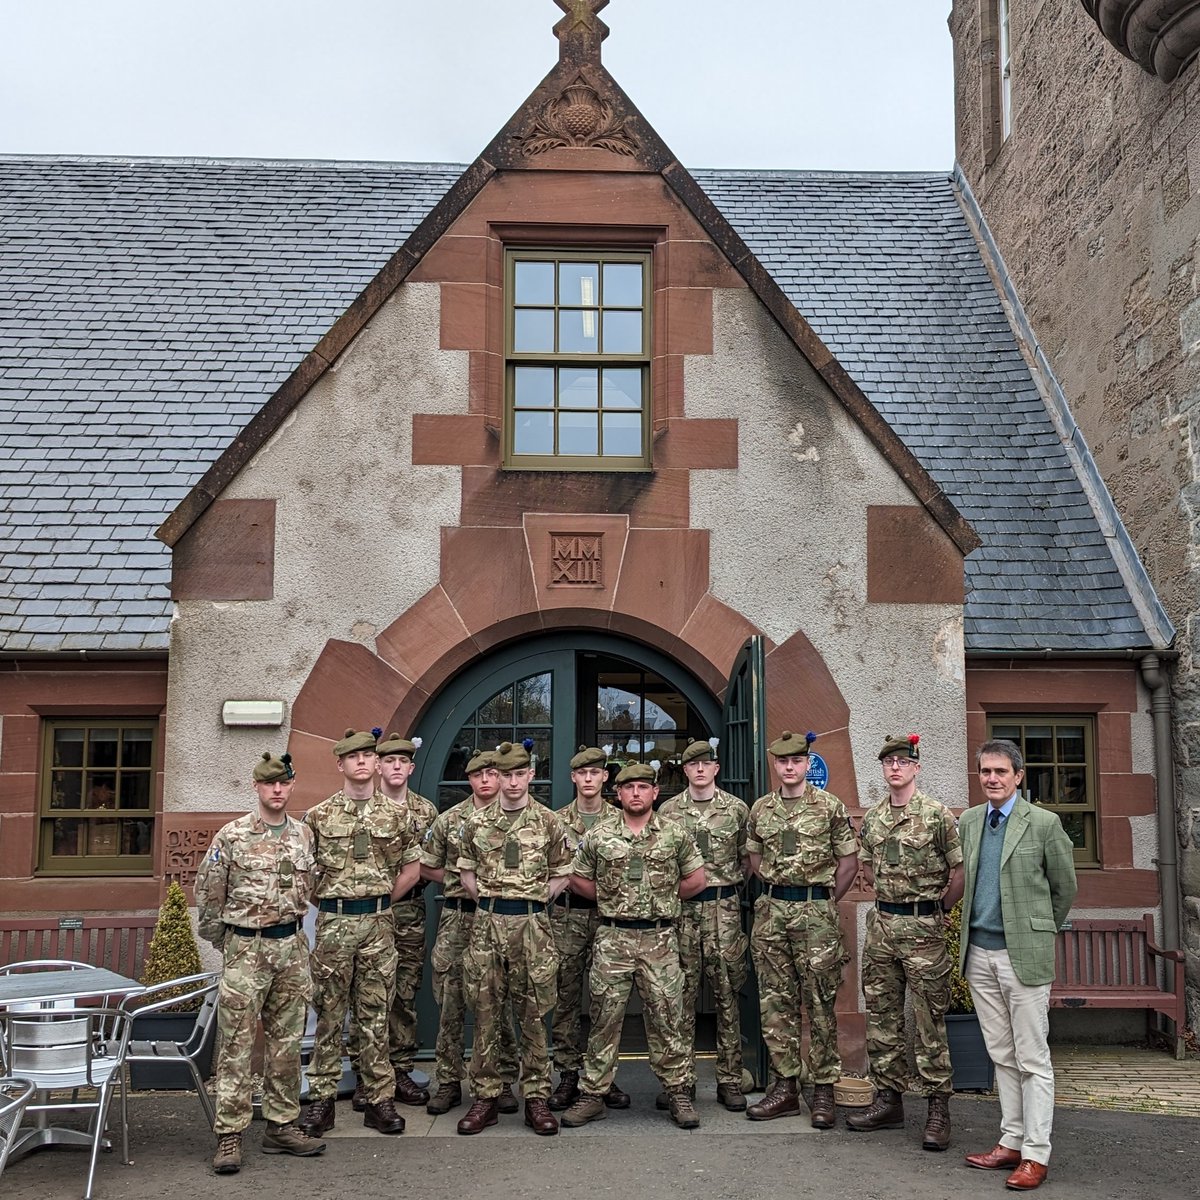 The Royal Regiment of Scotland has launched its Regimental Induction Cadre for newly trained soldiers. 9 soldiers accompanied by a corporal were hosted by the Regimental Secretary, Tim Carmichael, to a tour of the museum & lunch in the Waterloo Room.

#BWMuseum #TheBlackWatch